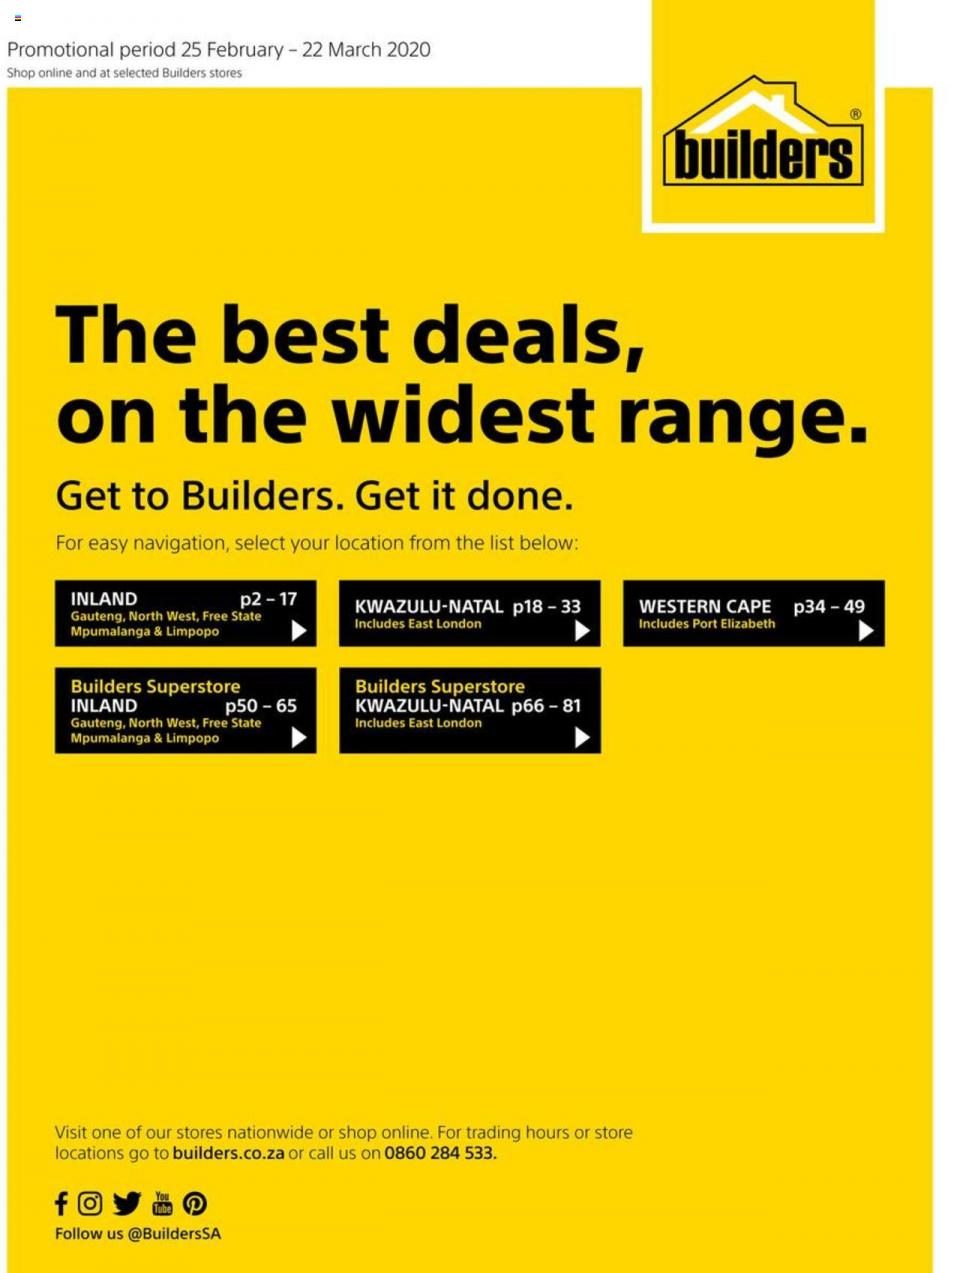 Builders Warehouse Specials Best Deals On The Widest Range 25 February 2020